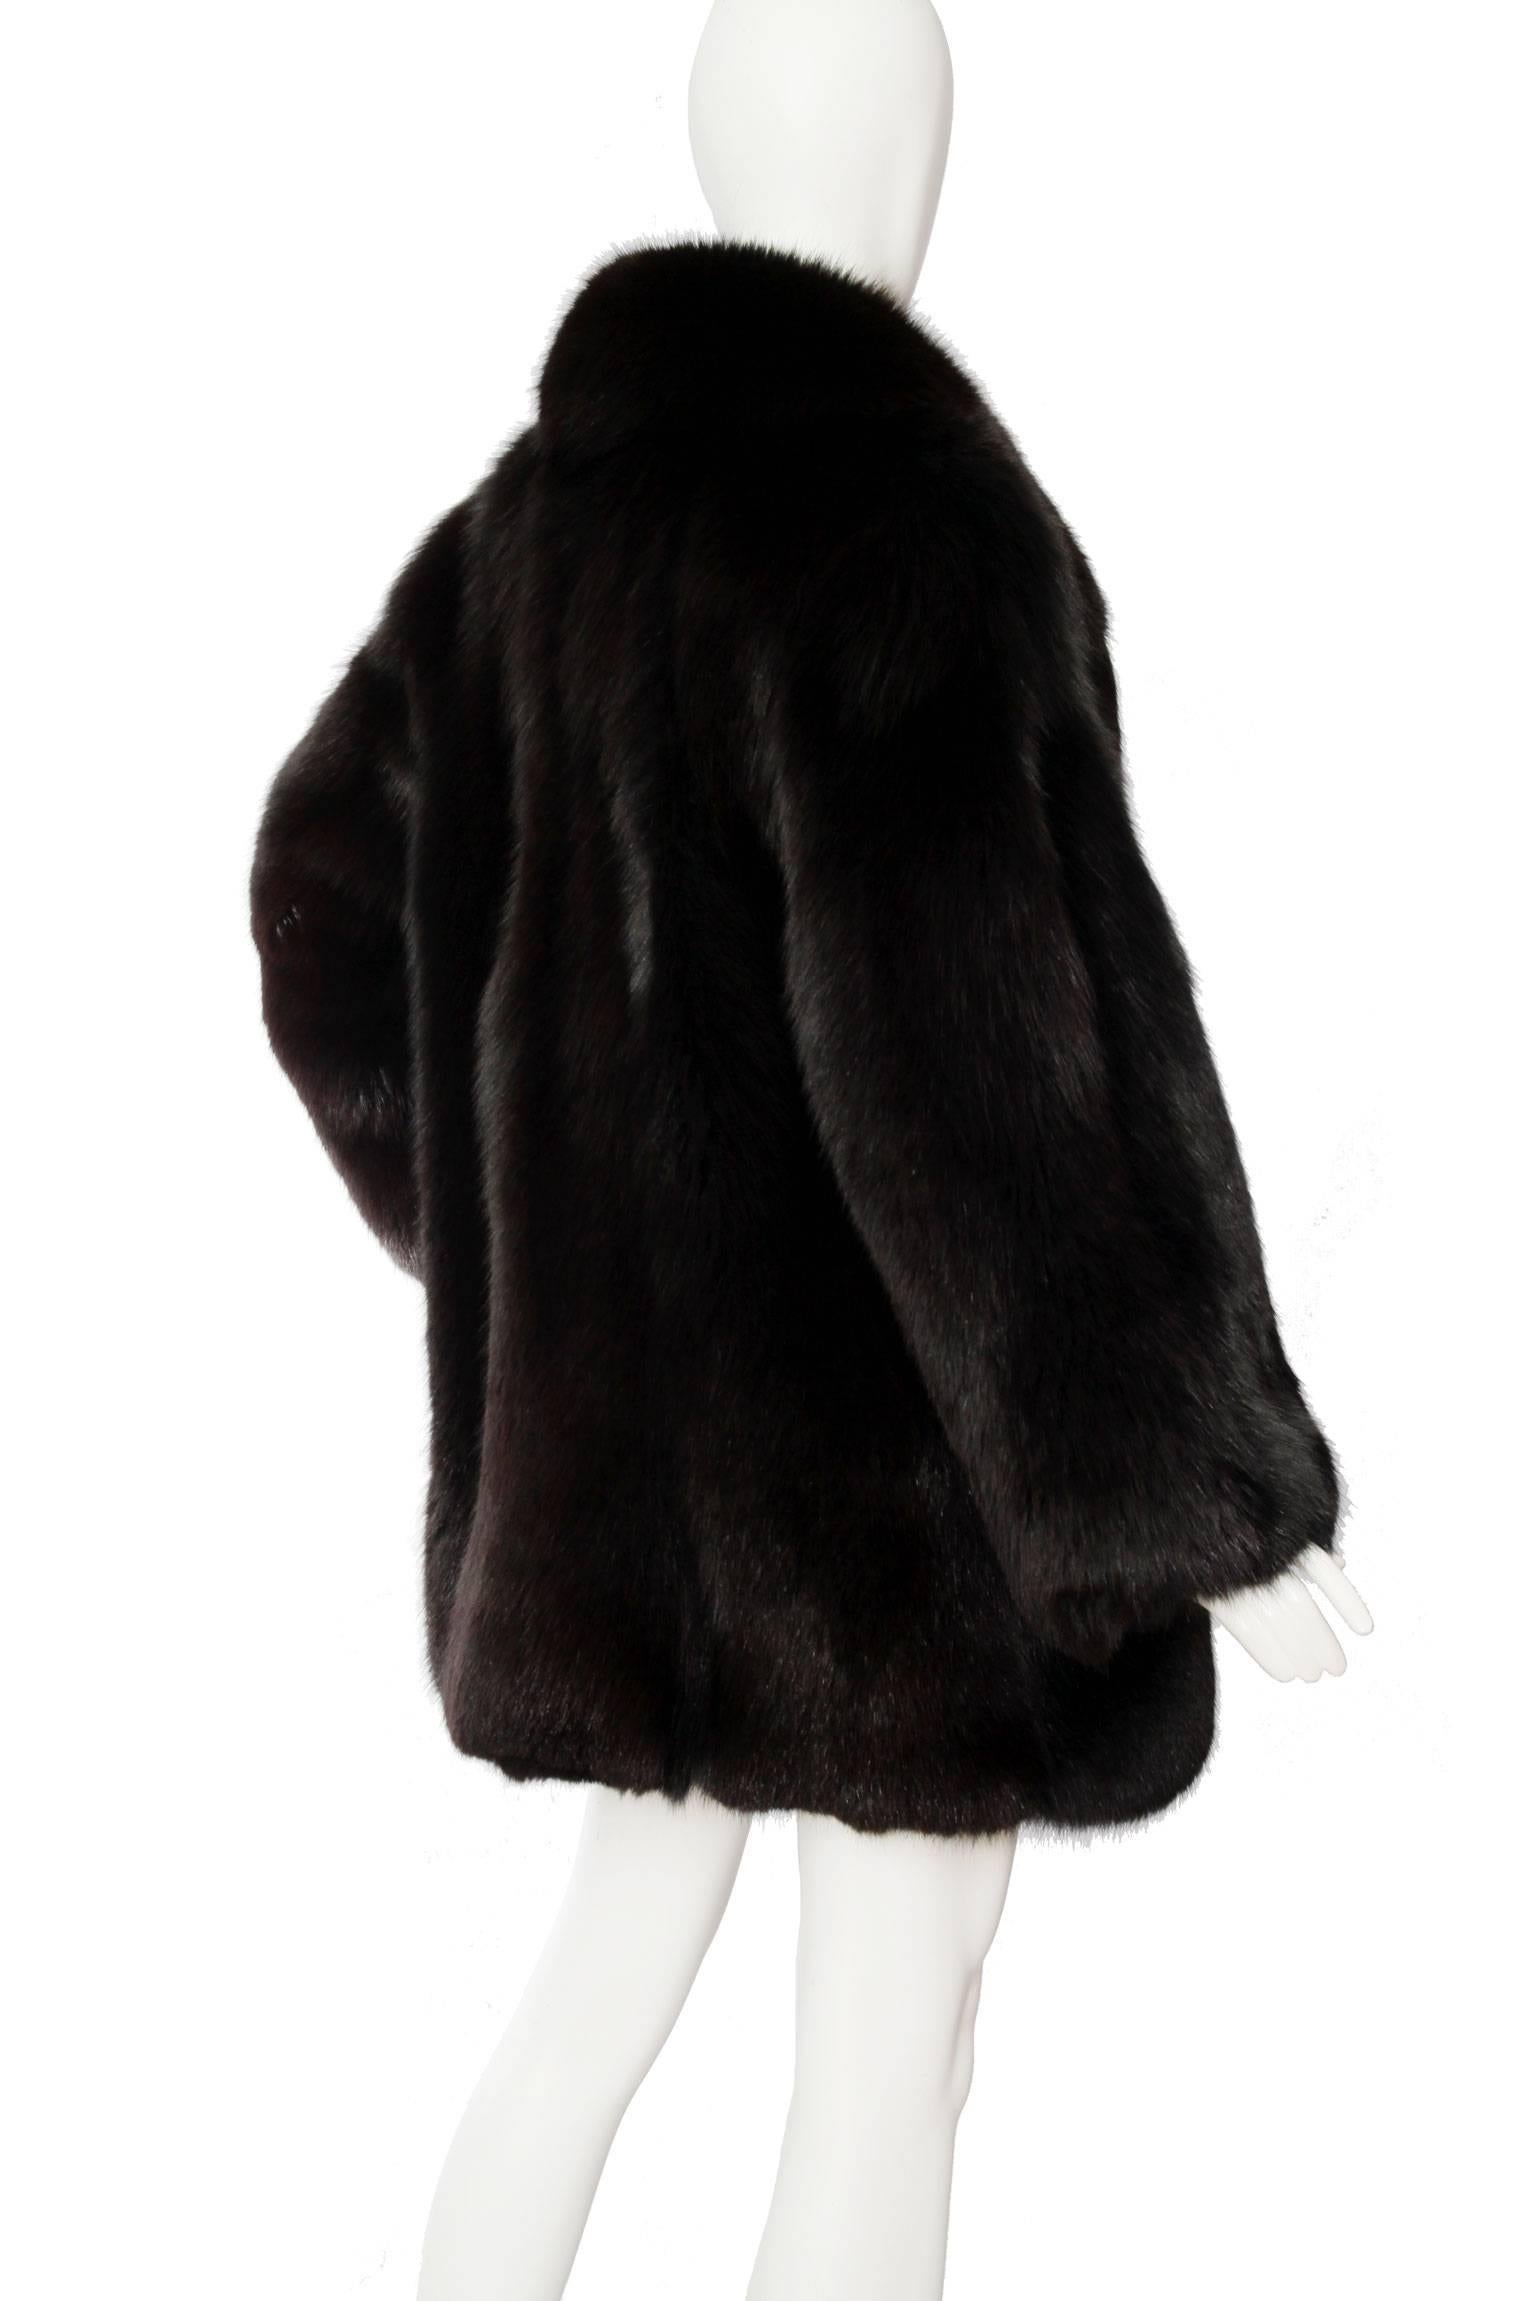 A glamorous 1980s black blue fox fur coat, exaggerated sleeves and a voluminous collar. The coat has side pockets and a matching black lining. 

The size of the coat corresponds to a modern size Medium. 
